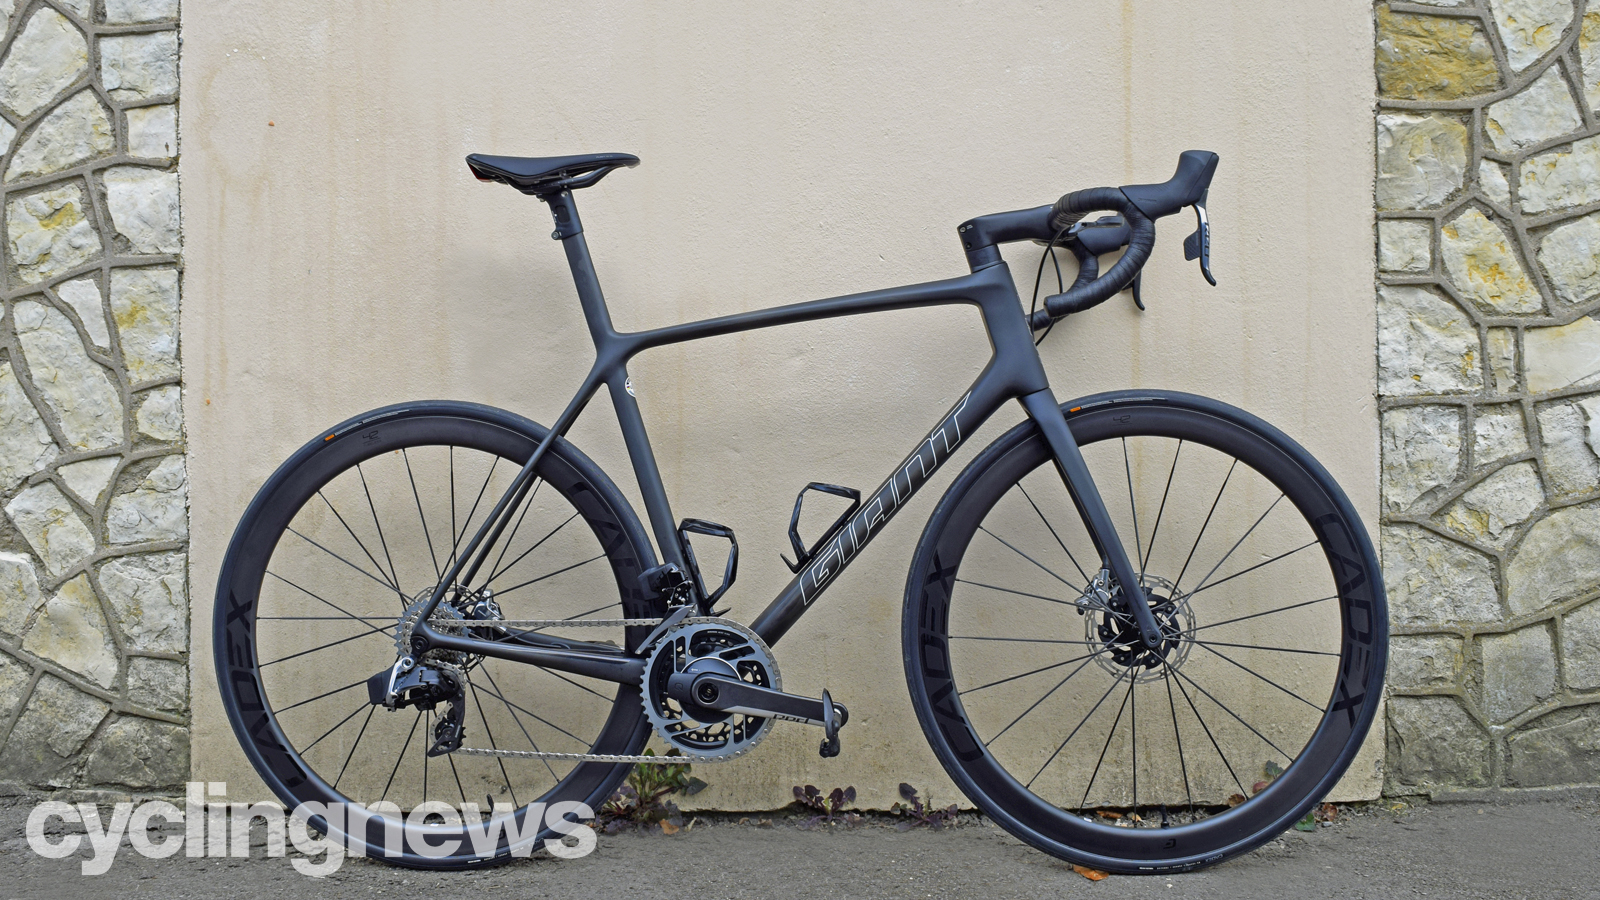 New Giant TCR launched and it's faster, lighter and stiffer than before Cyclingnews